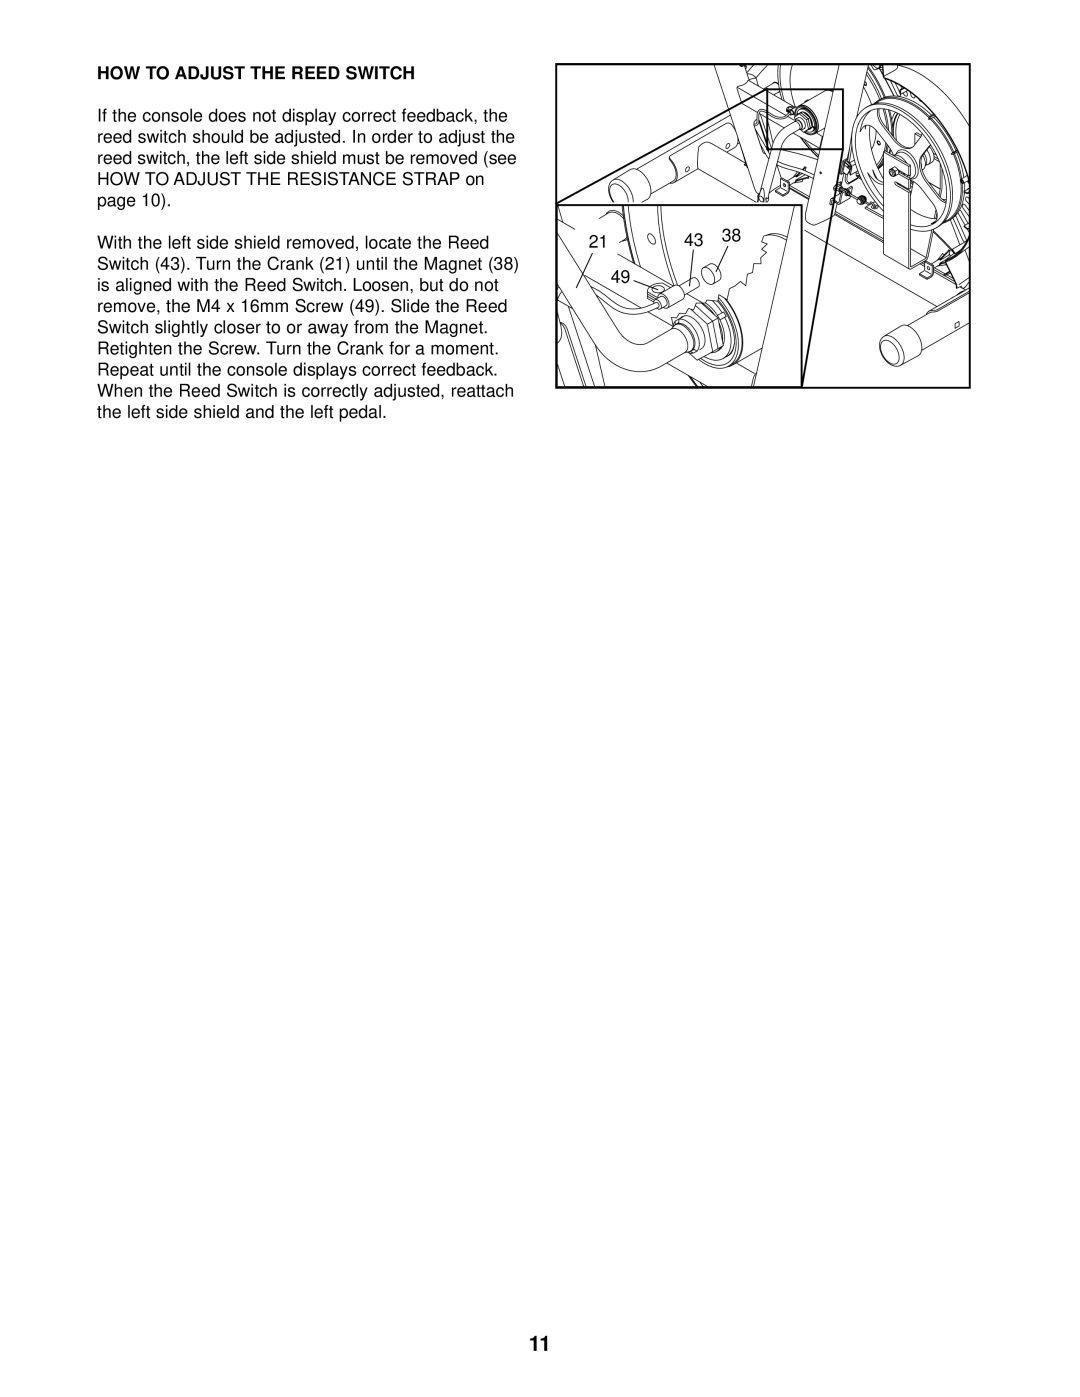 Weslo 310 CS user manual How To Adjust The Reed Switch, page 